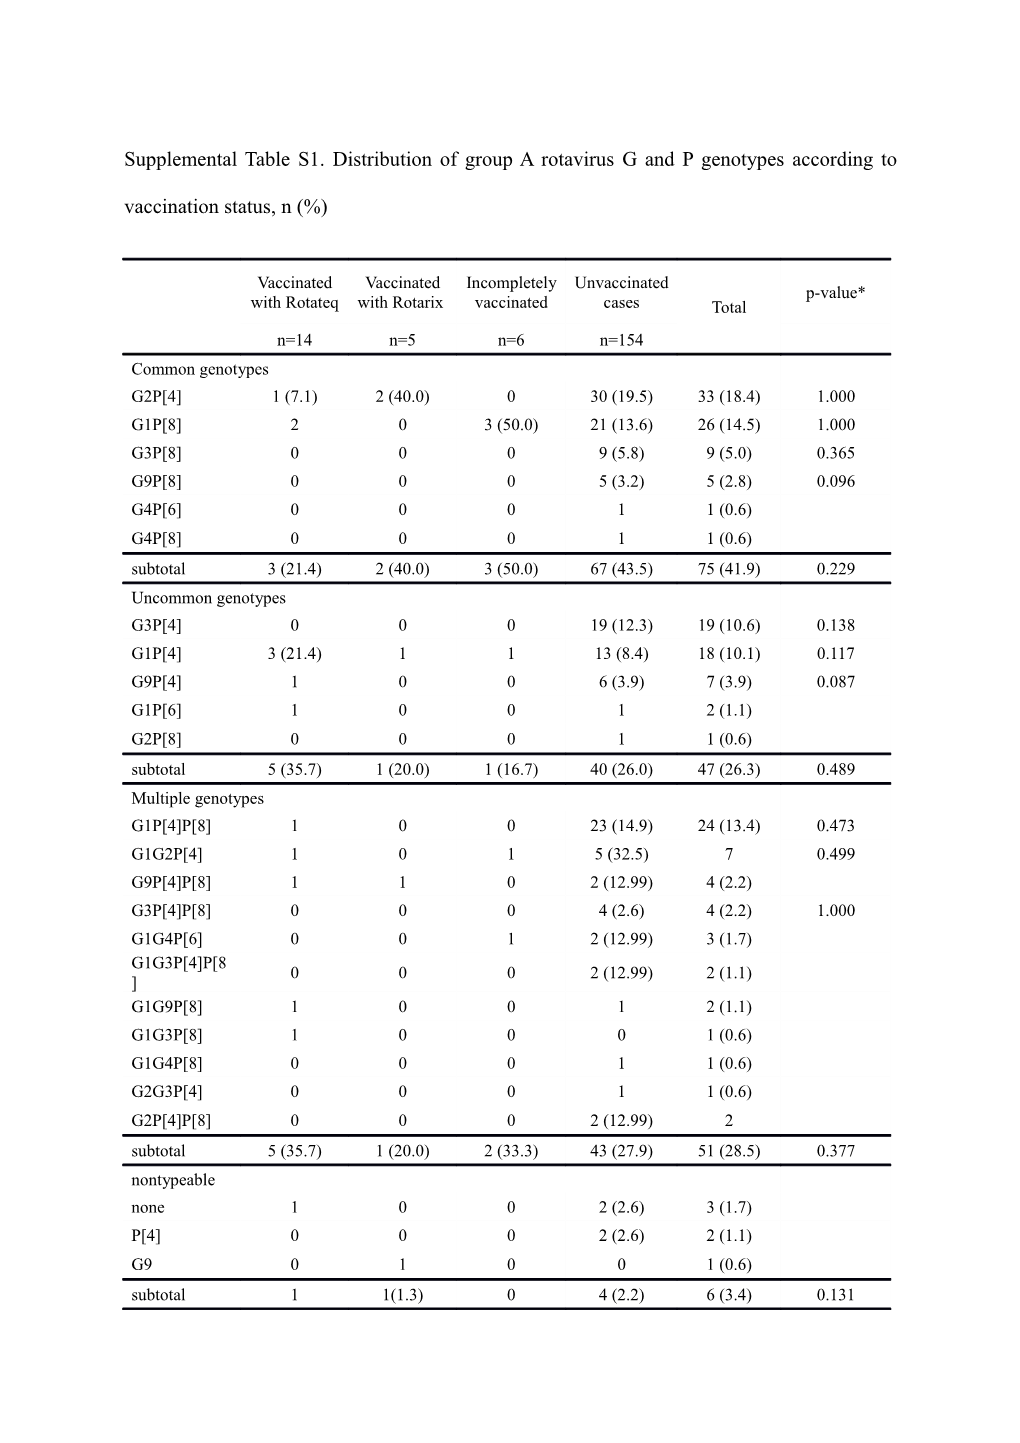 Supplemental Table S1. Distribution of Group a Rotavirus G and P Genotypes According To